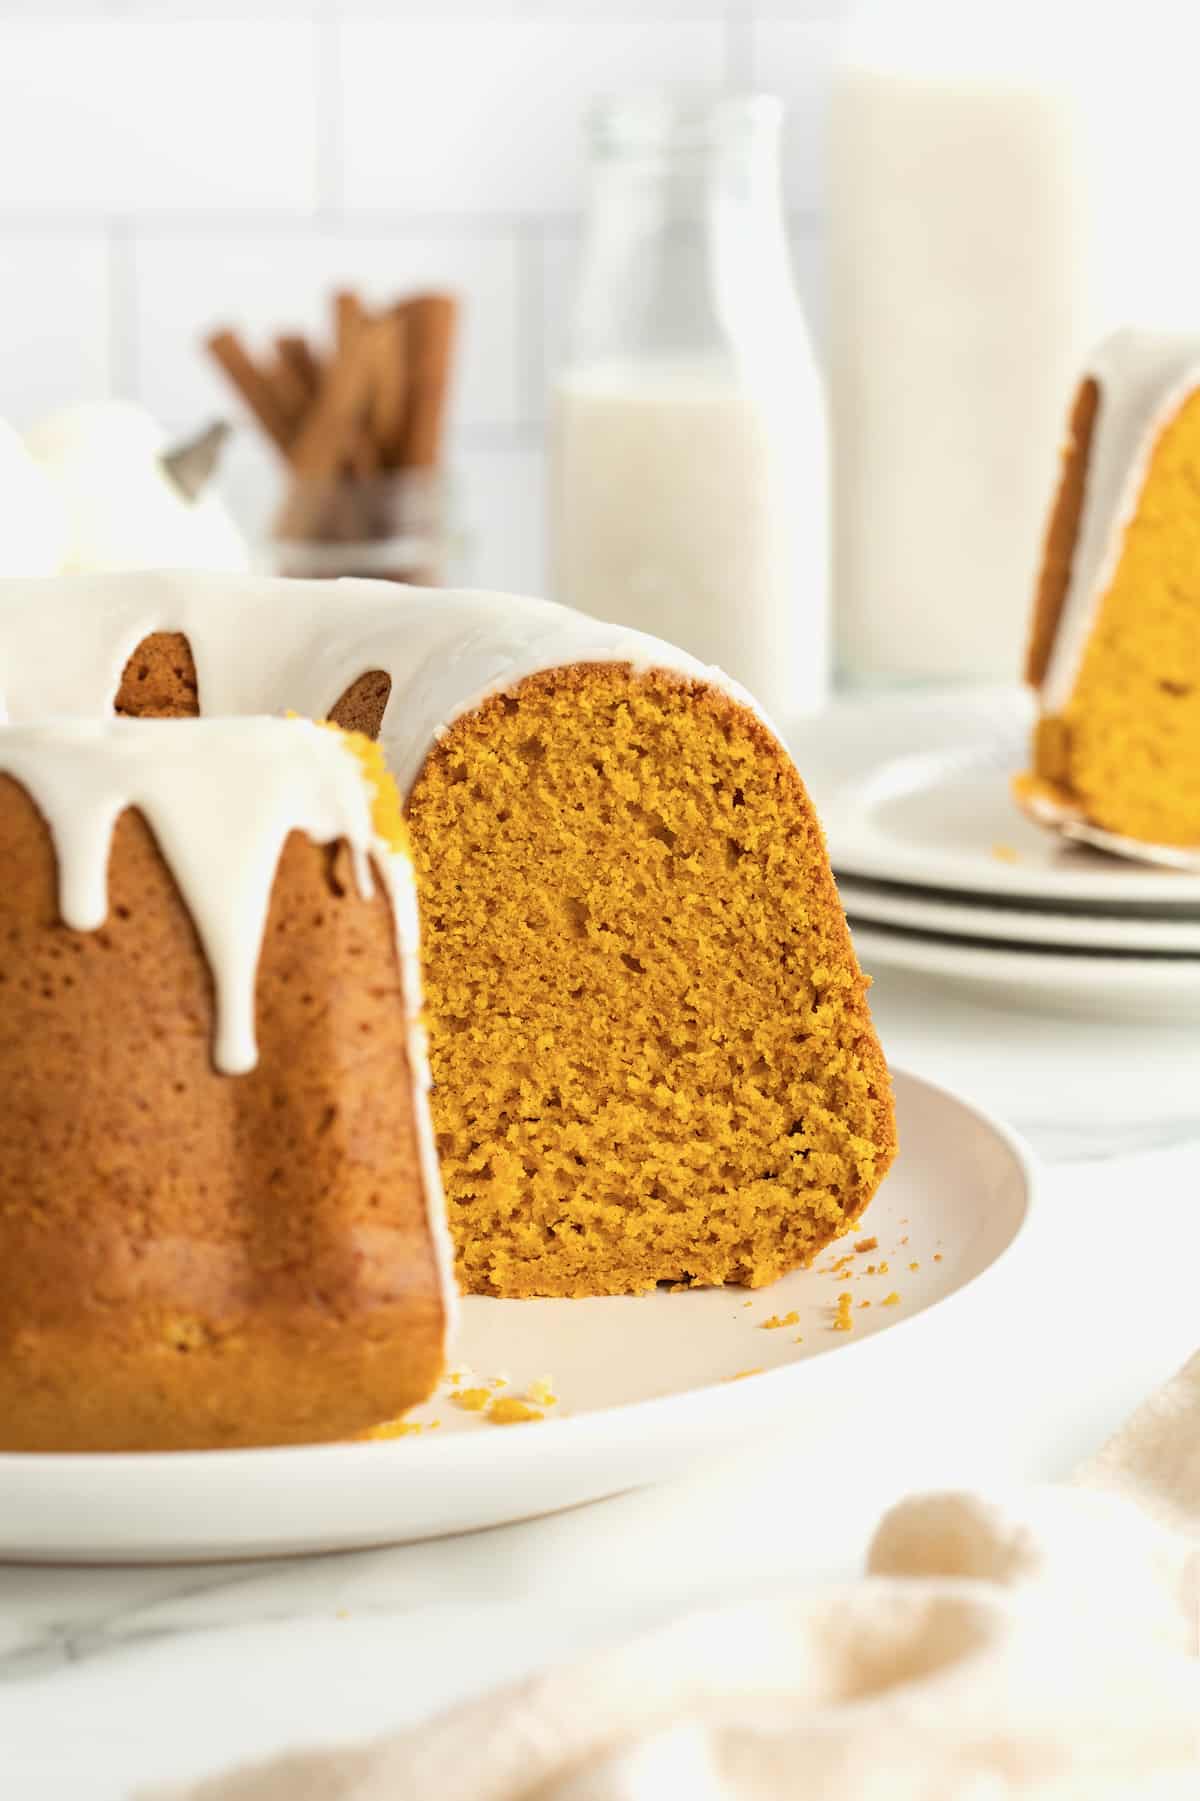 A pumpkin pound cake topped with a white glaze dripping down it on a white serving platter. One slice is missing from the cake.